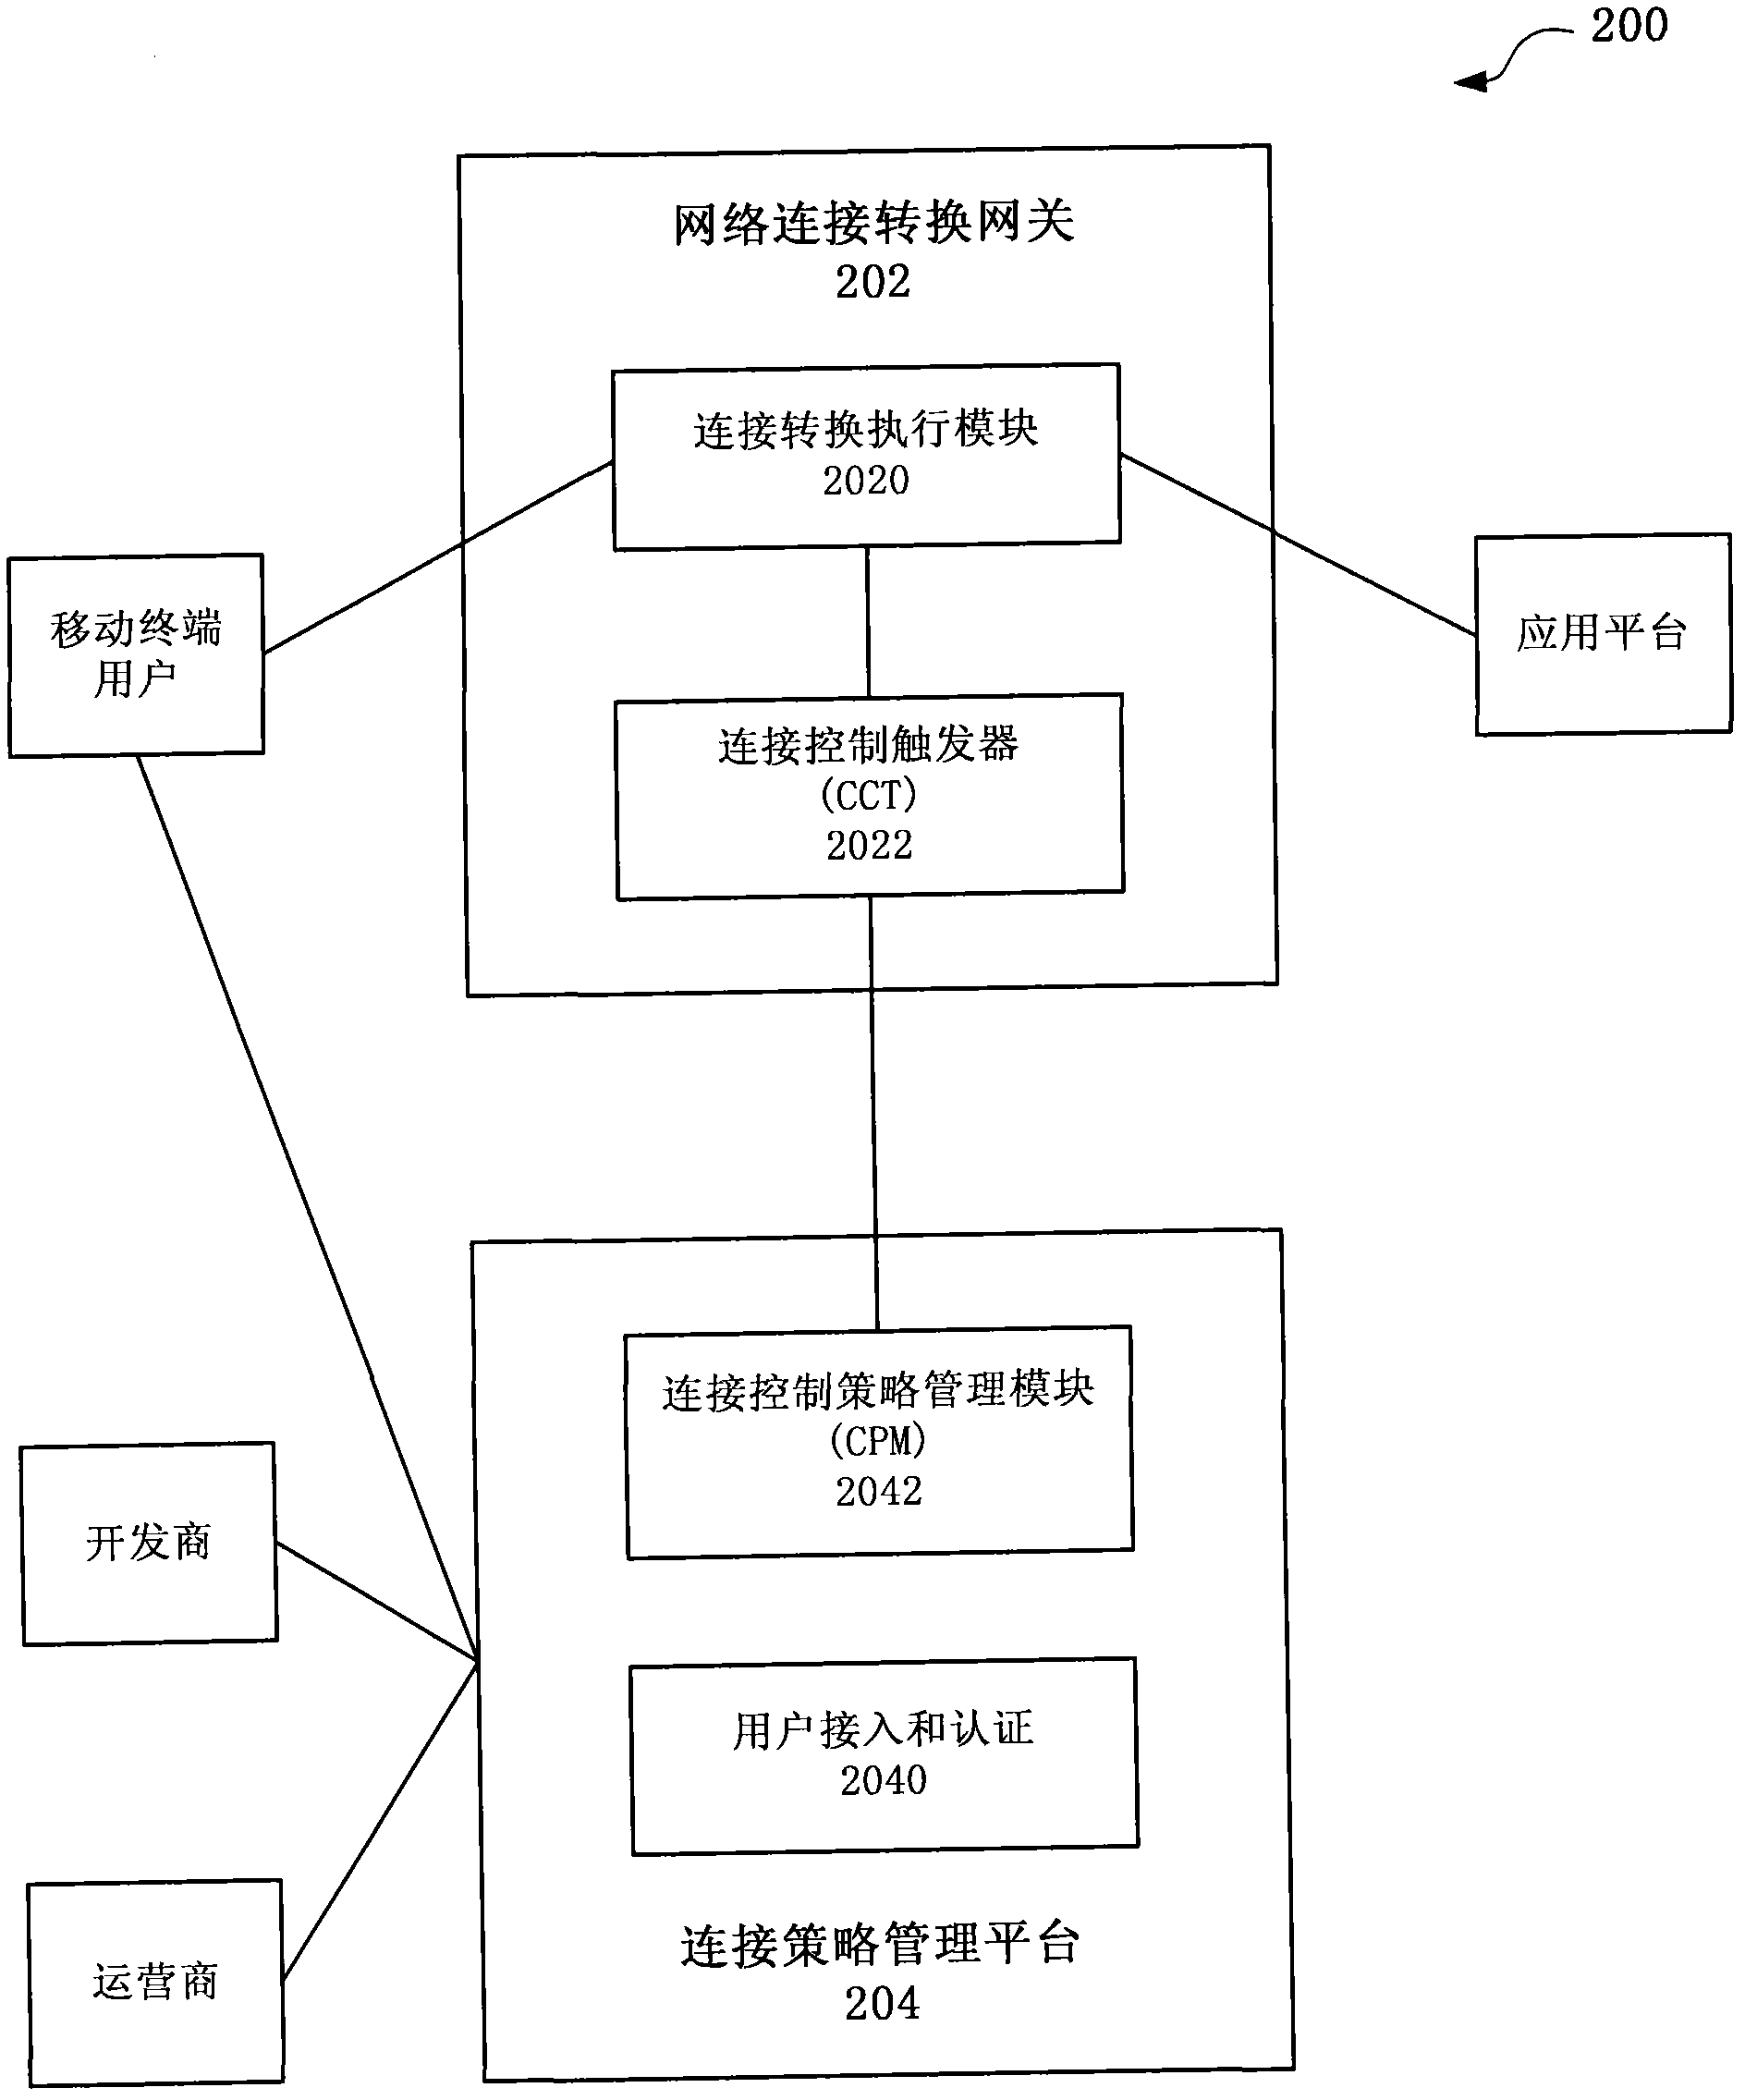 System and method for controlling networking authorization on networking application